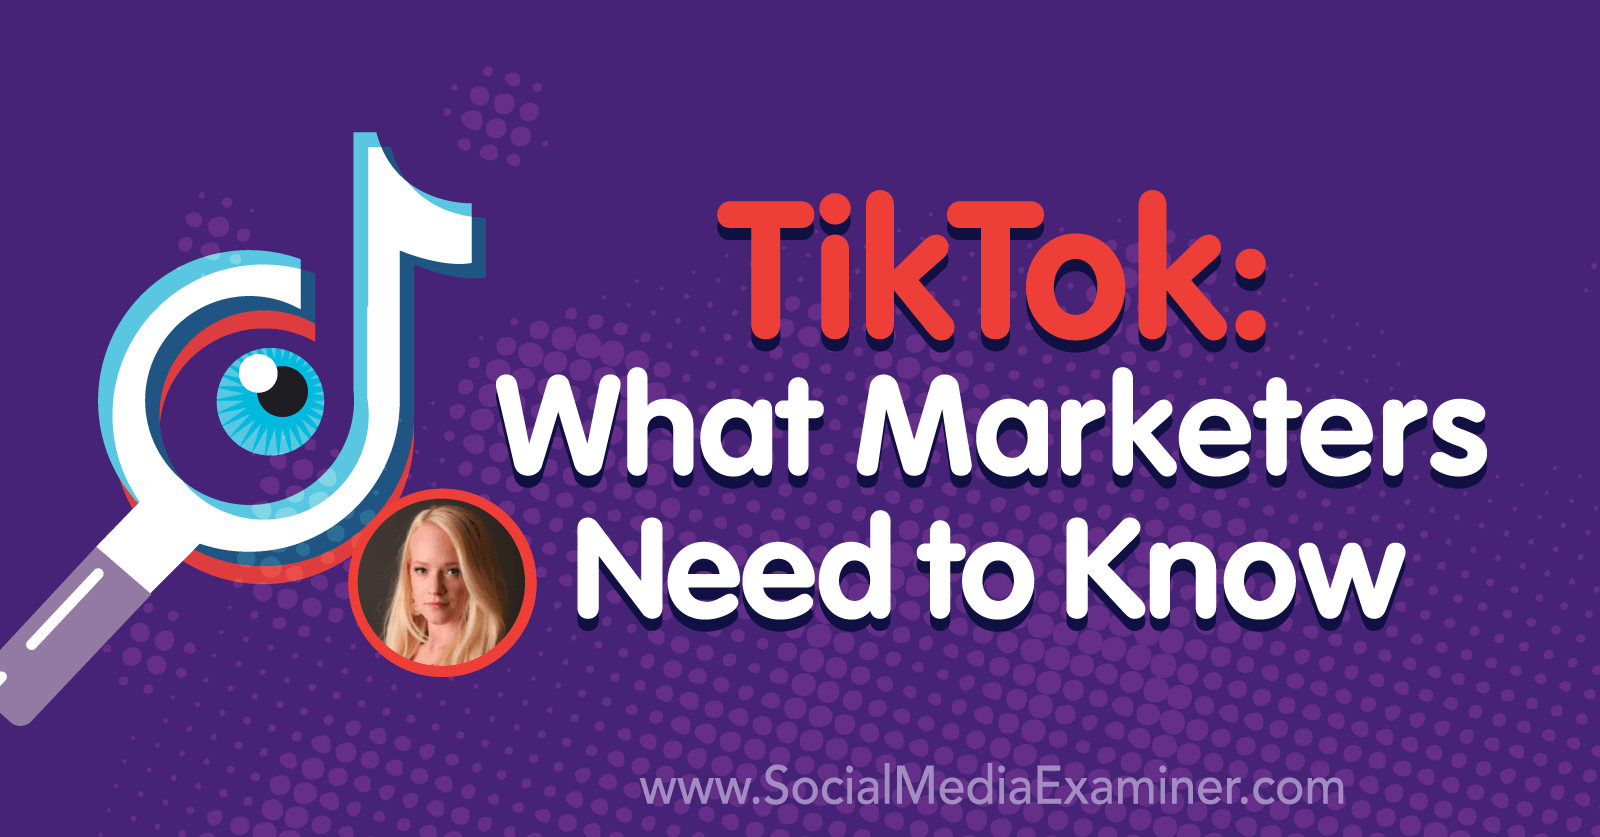 Tiktok What Marketers Need To Know Social Media Examiner